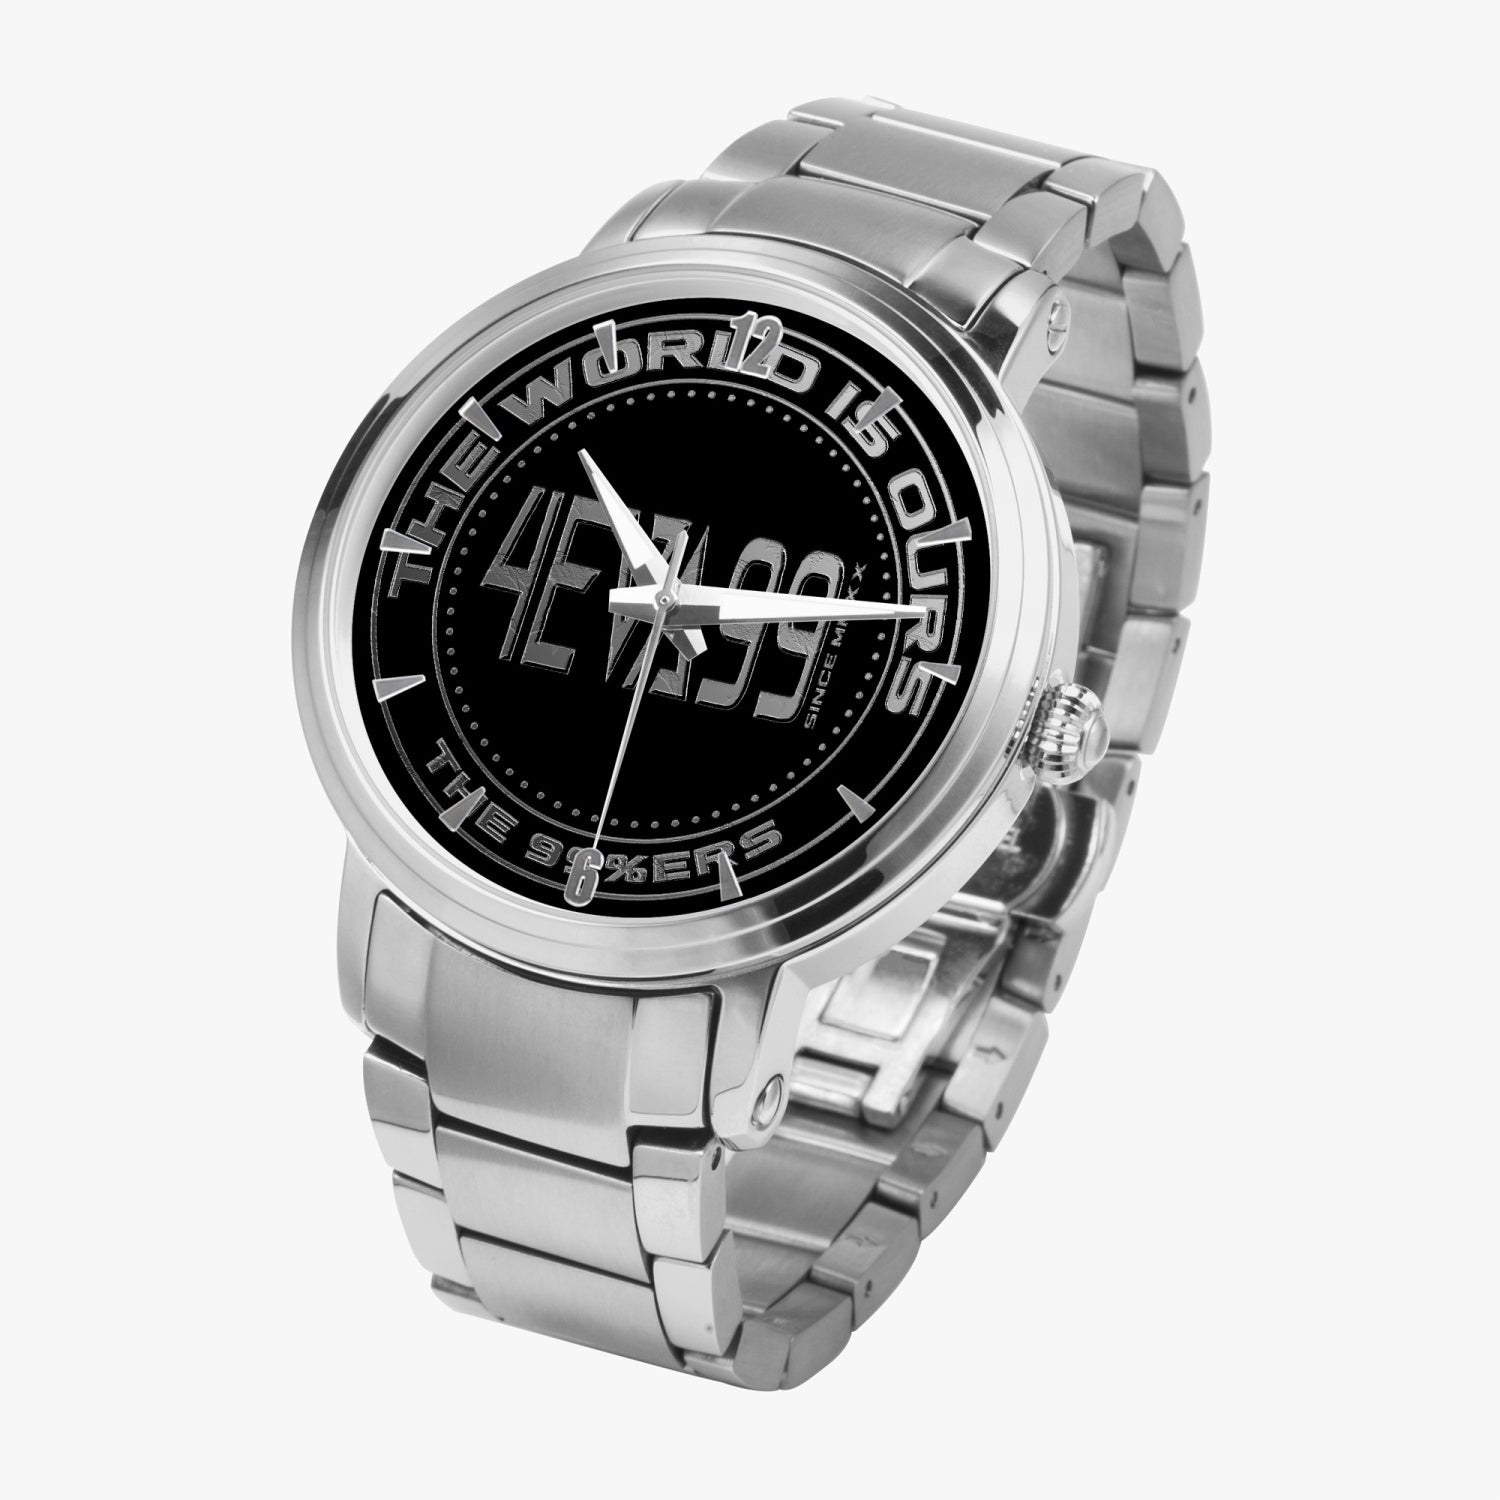 EMBLEM 213. New Steel Strap Automatic Watch (With Indicators)